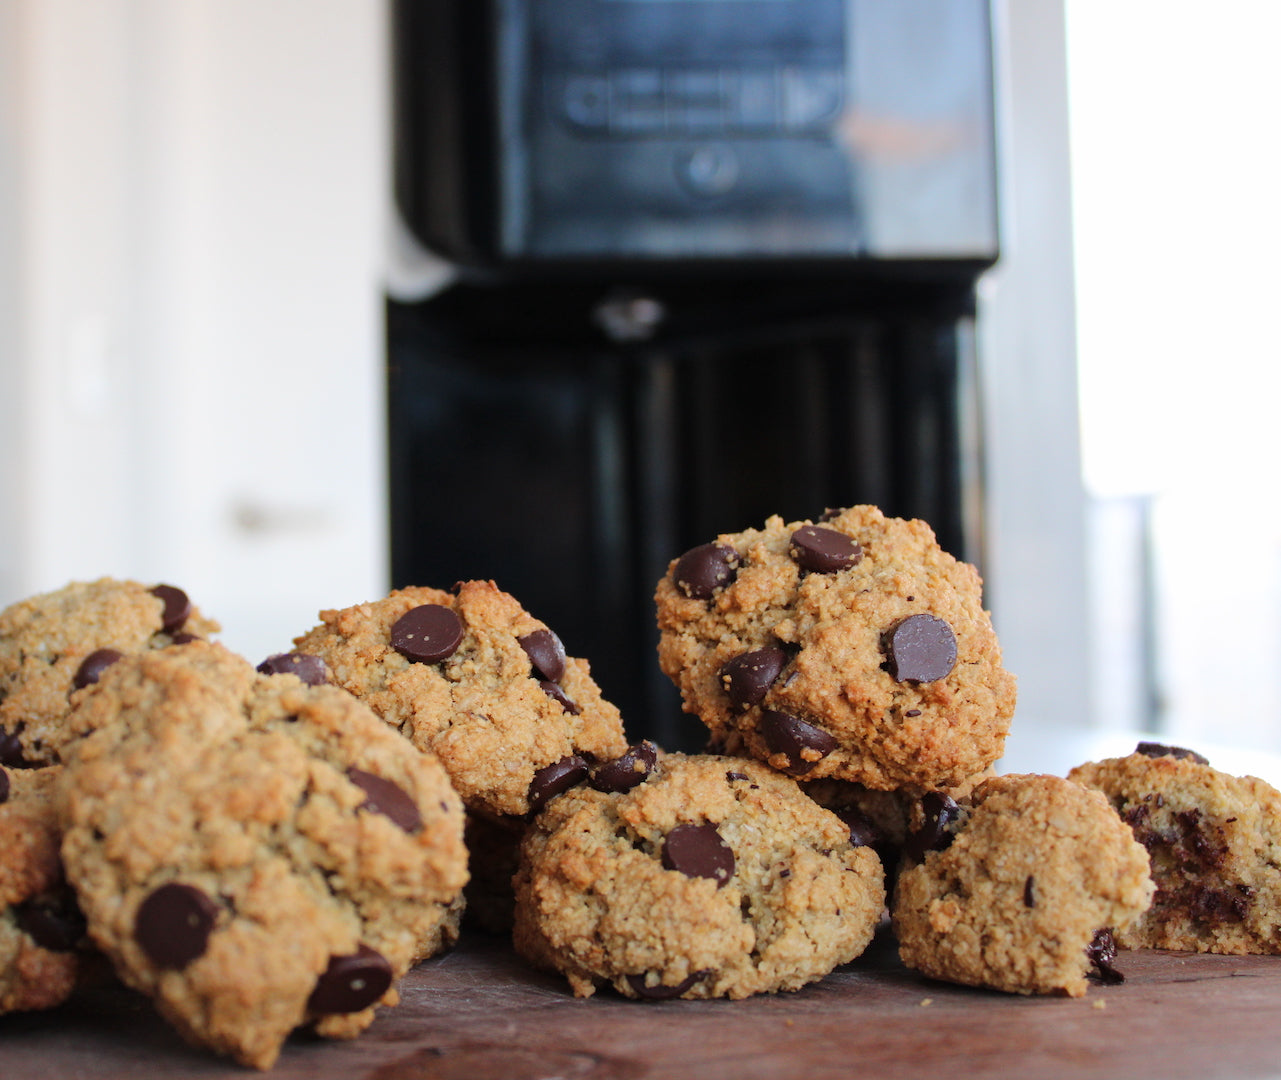 Image of father's day desserts option 5: infused oatmeal chocolate cookies.